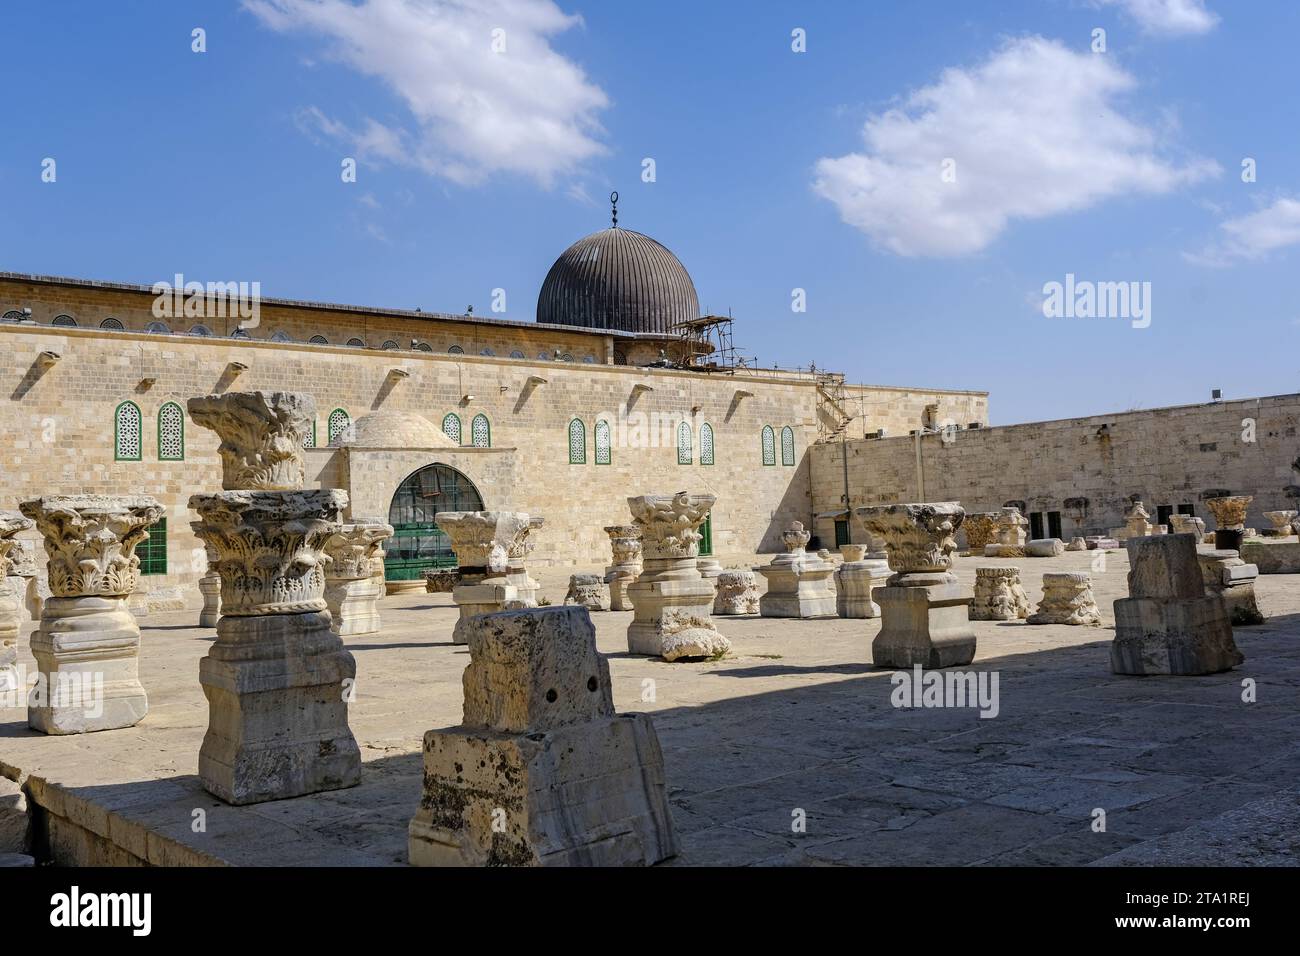 Jerusalem, Israel - October 17, 2022: The Al-Aqsa Mosque on the Temple Mount in Jerusalem Old City. Stock Photo